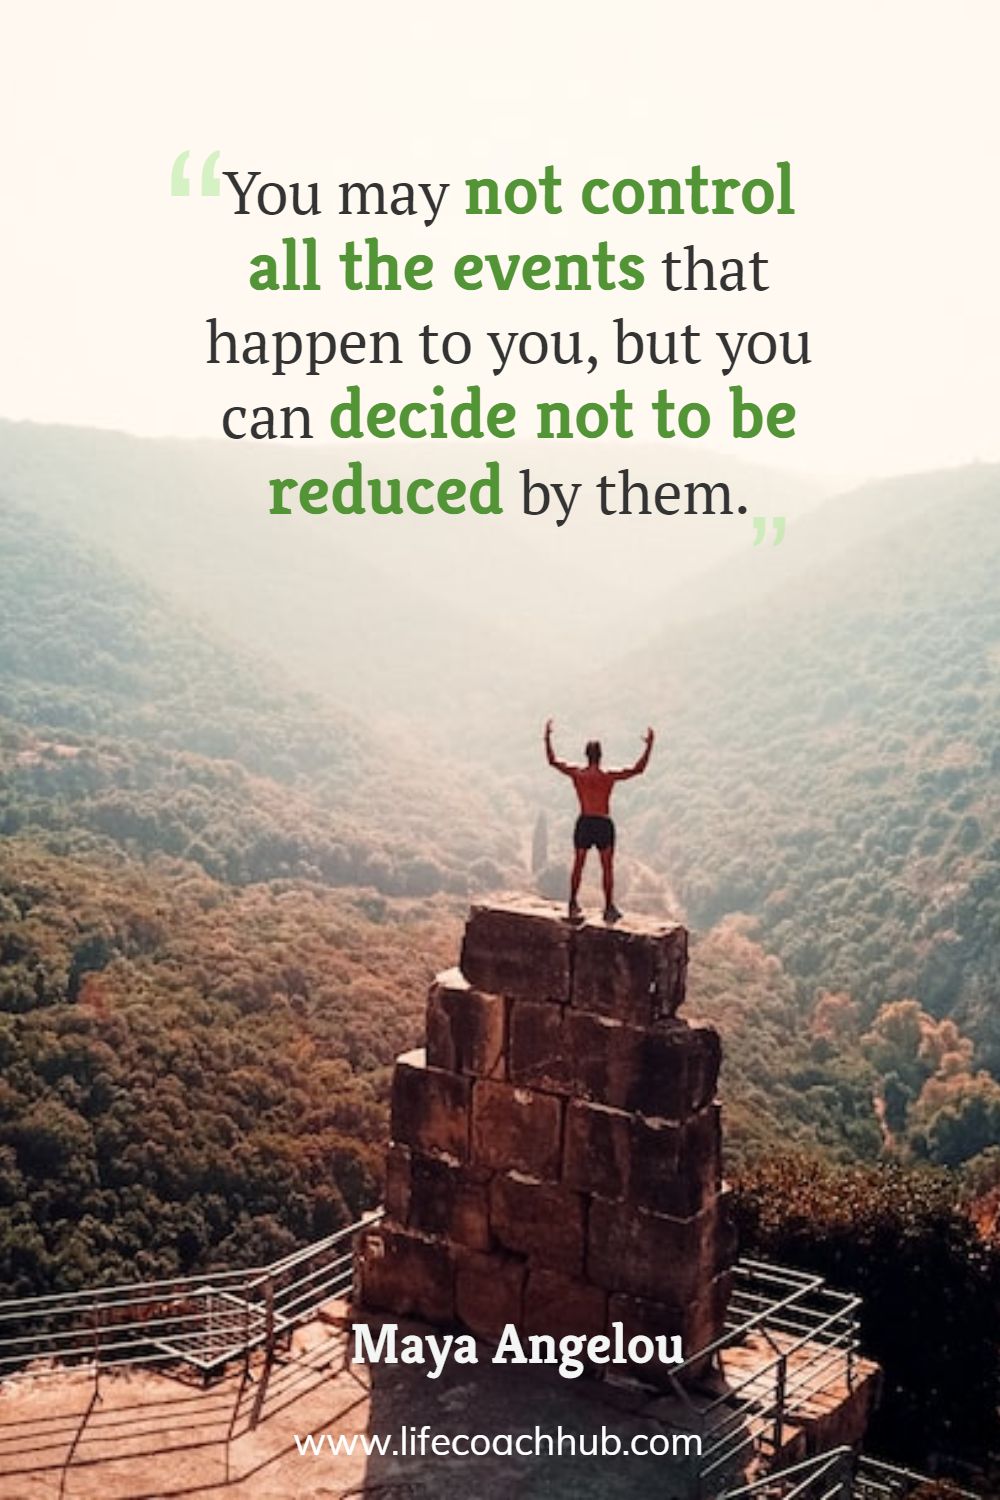 You may not control all the events that happen to you, but you can decide not to be reduced by them. Maya Angelou Coaching Quote